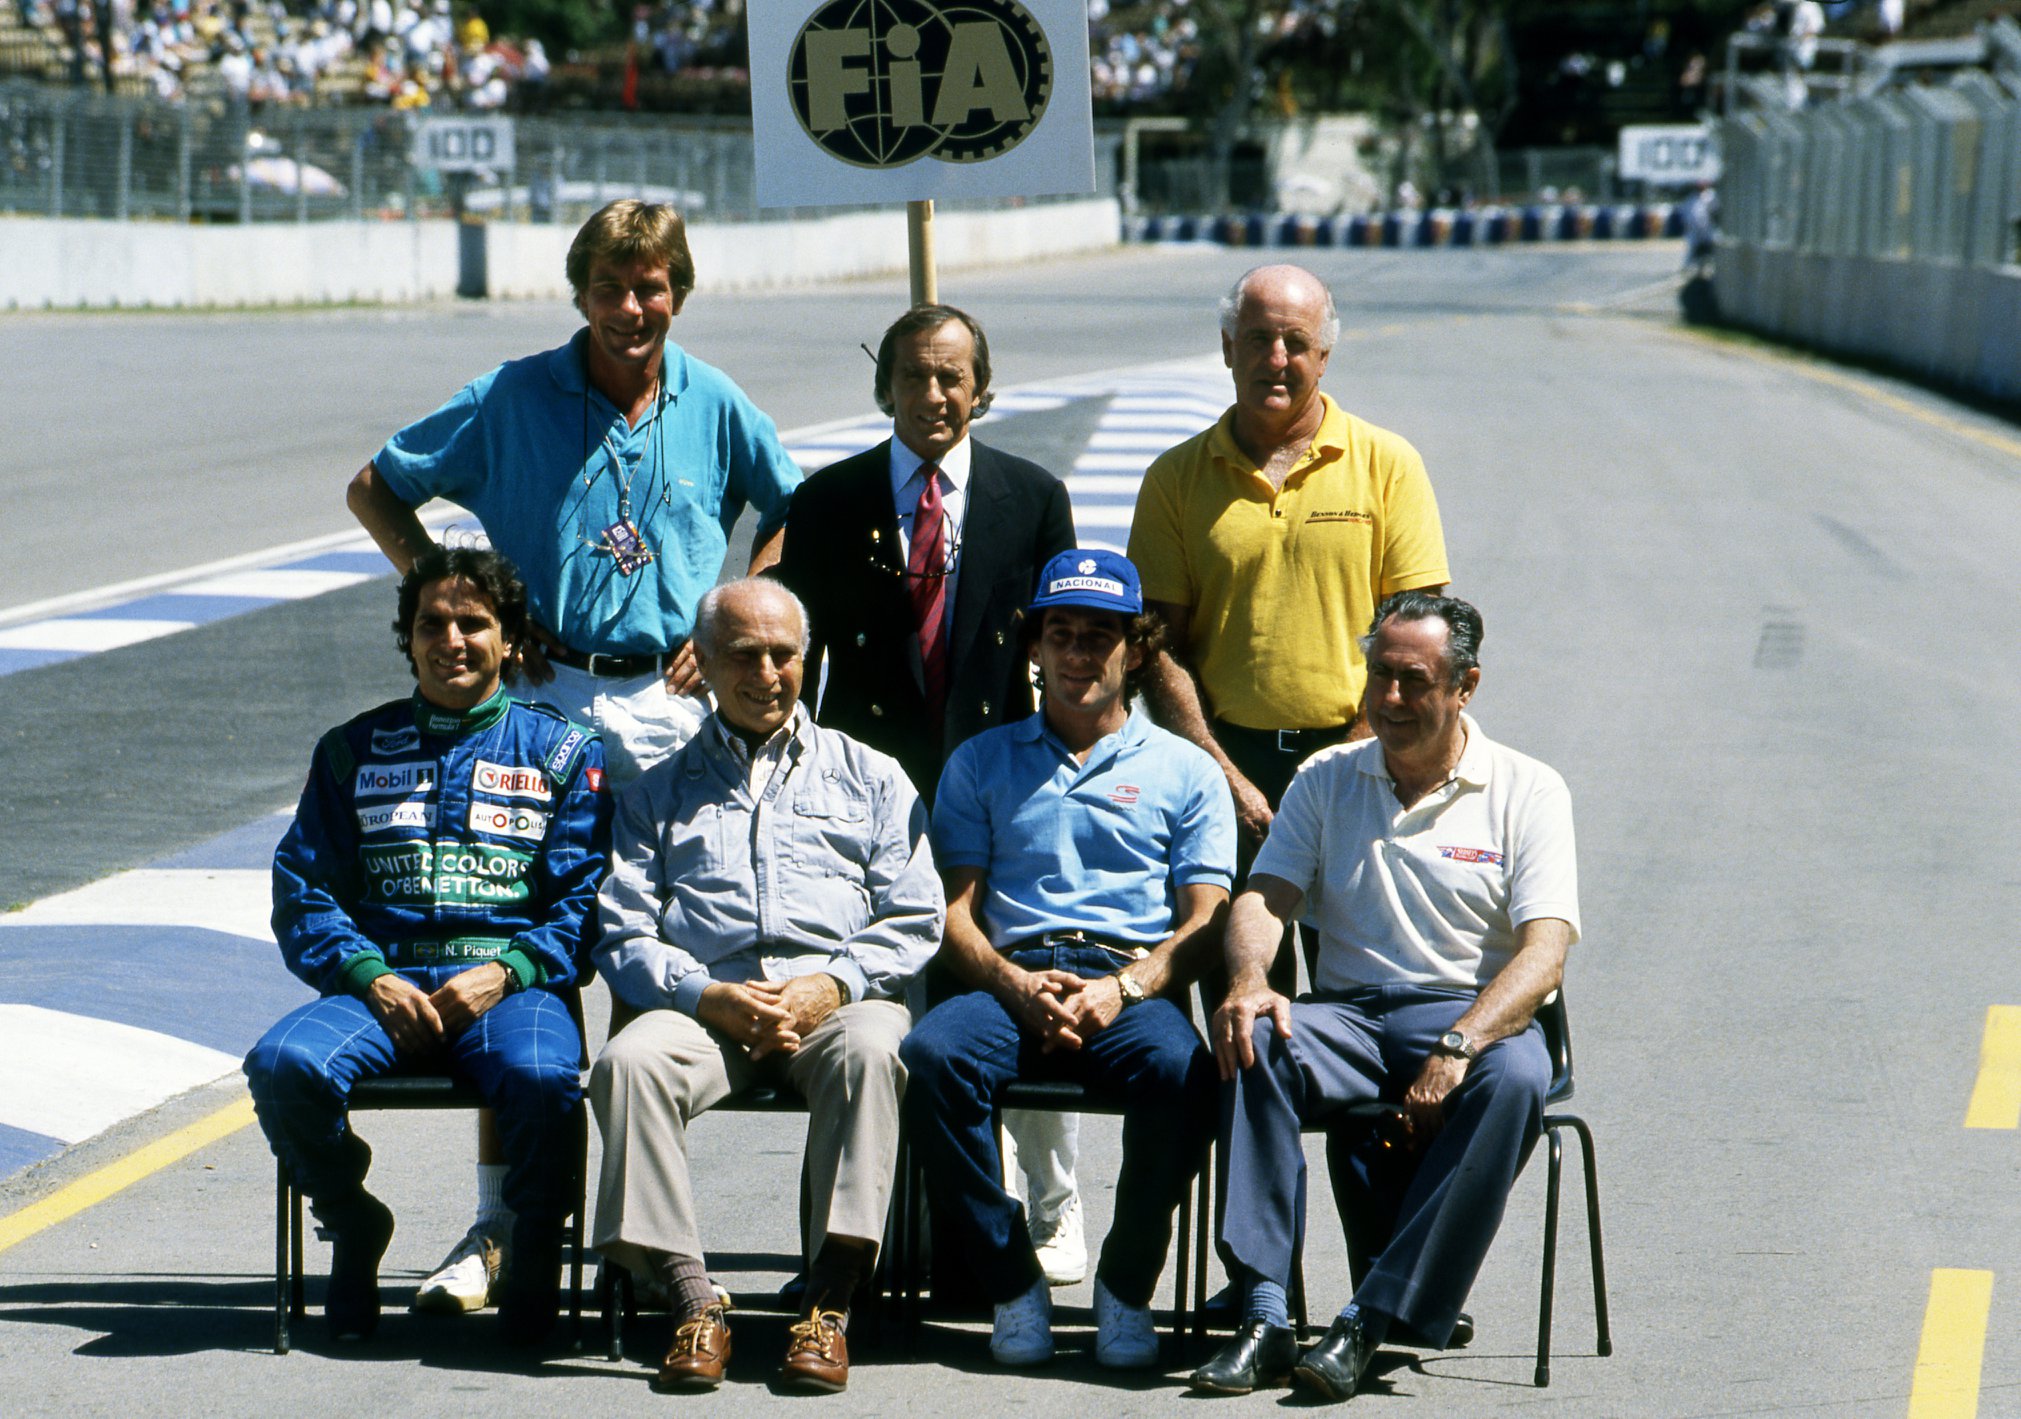 Jack Brabham joins F1 World Champions James Hunt, Jackie Stewart, Denny Hulme, Nelson Piquet, Juan Manuel Fangio and Ayrton Senna to mark the 500th event to count for the World Championship at the Australian Grand Prix in Adelaide on 04 November 1990.